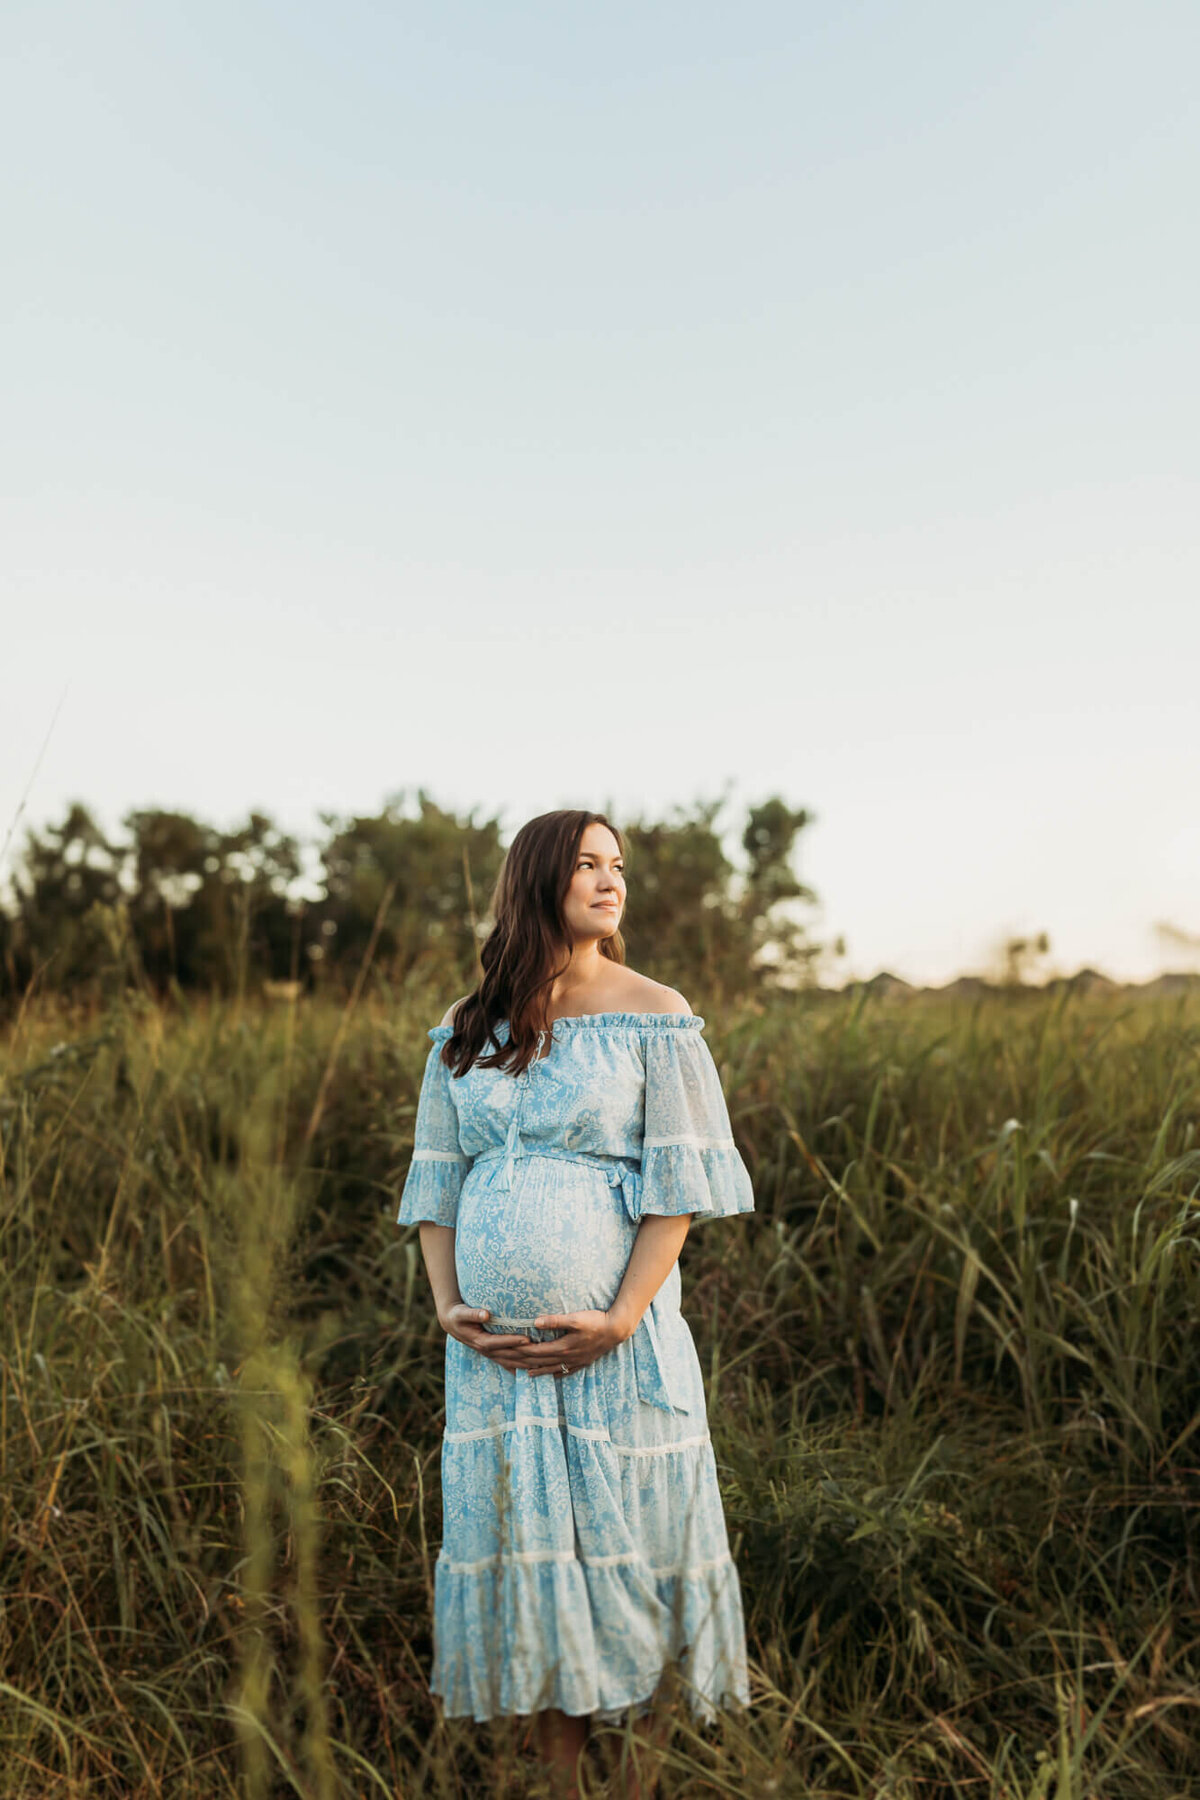 gorgeous woman daydreaming about her son and caressing her belly while standing in overgrown grass field.